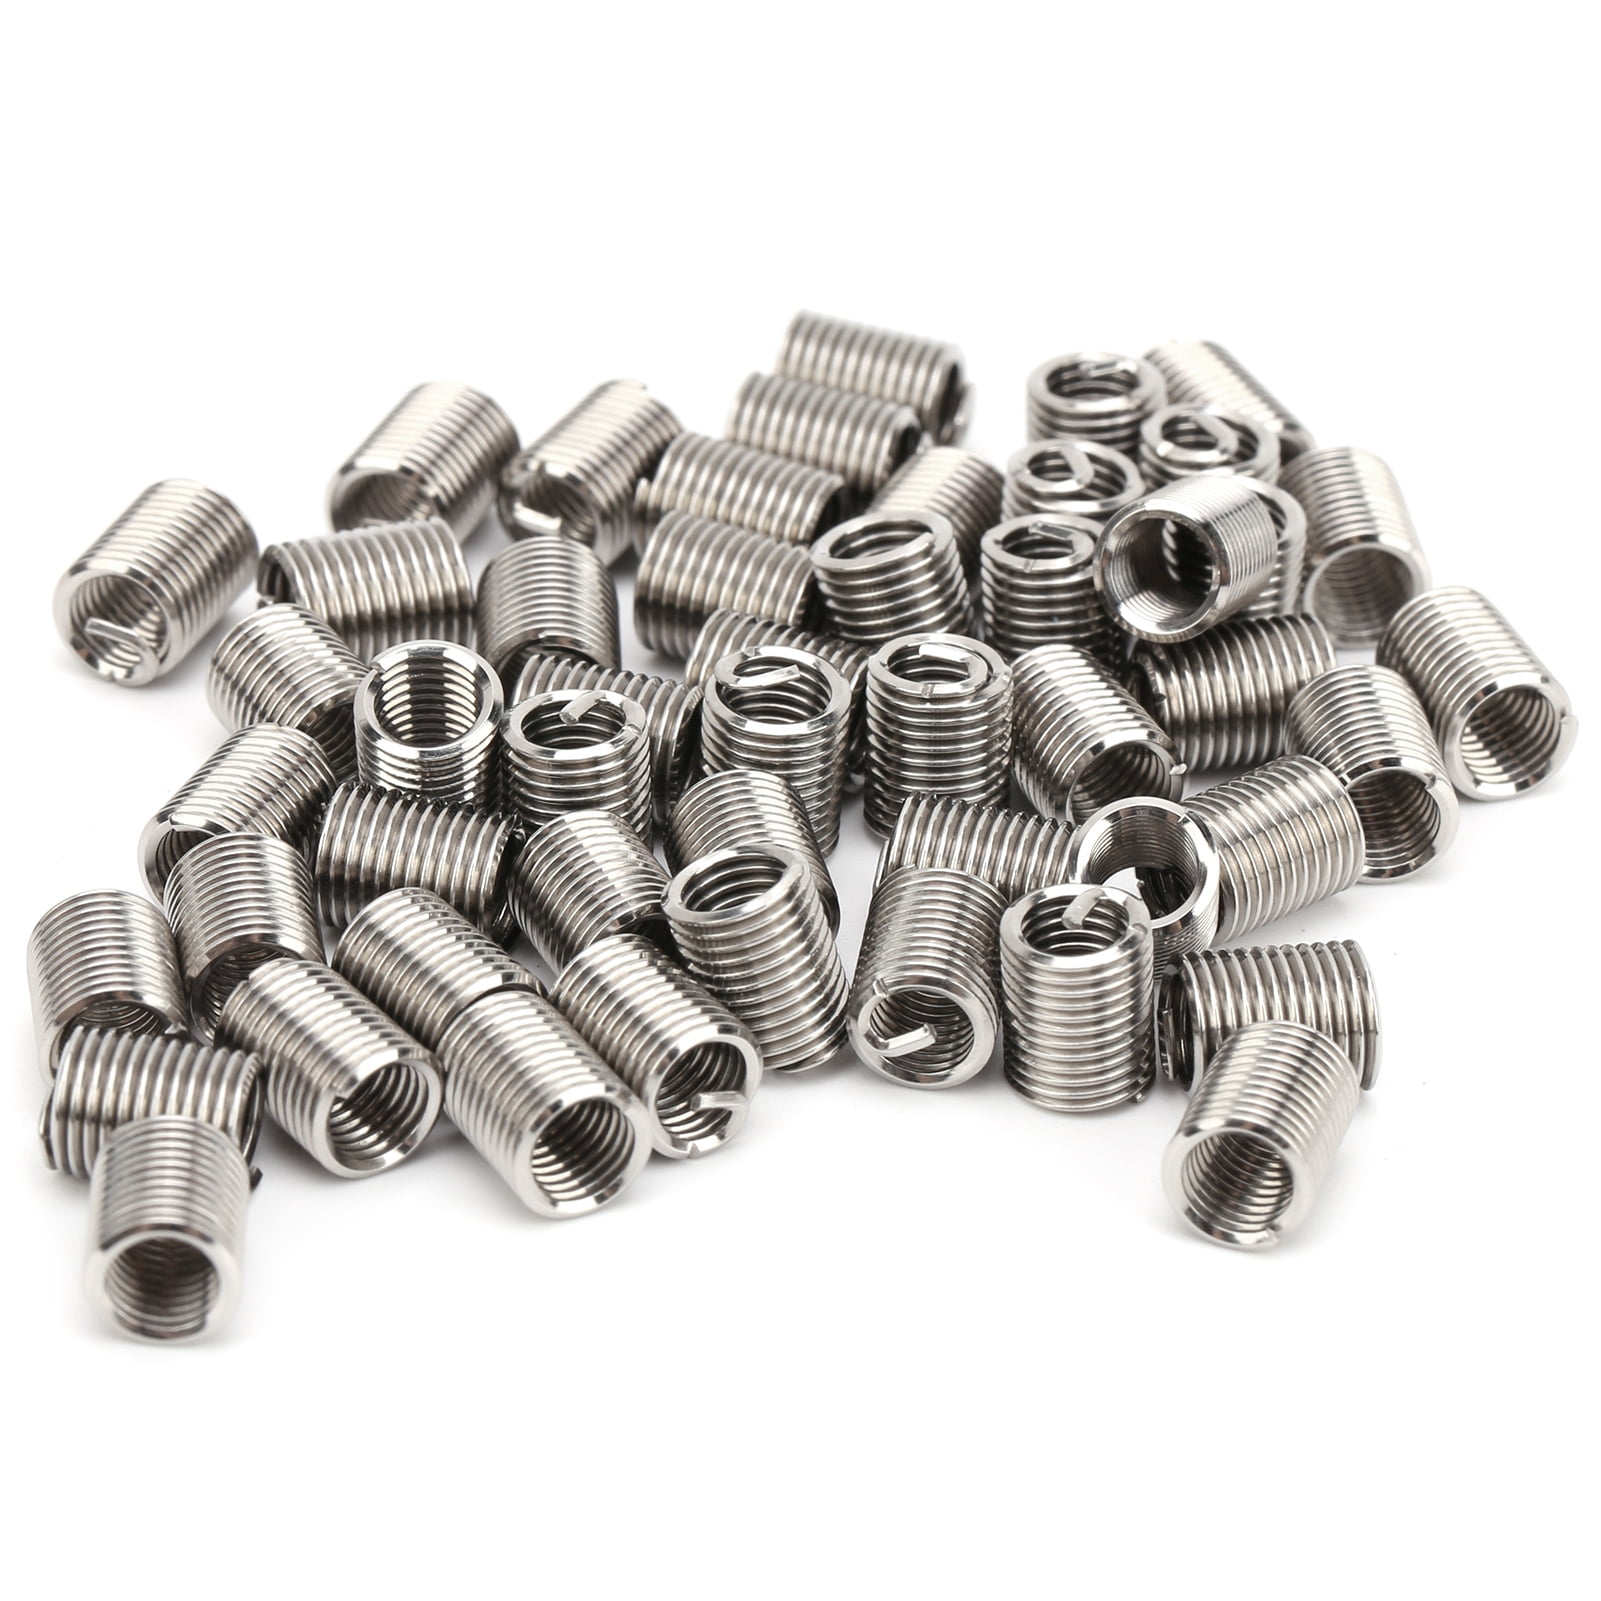 50pcs Wire Thread Inserts Durable 304 Stainless Steel Coiled Wire Helical Screw Thread Inserts M6 x 1.0 x 2.5 D Length 